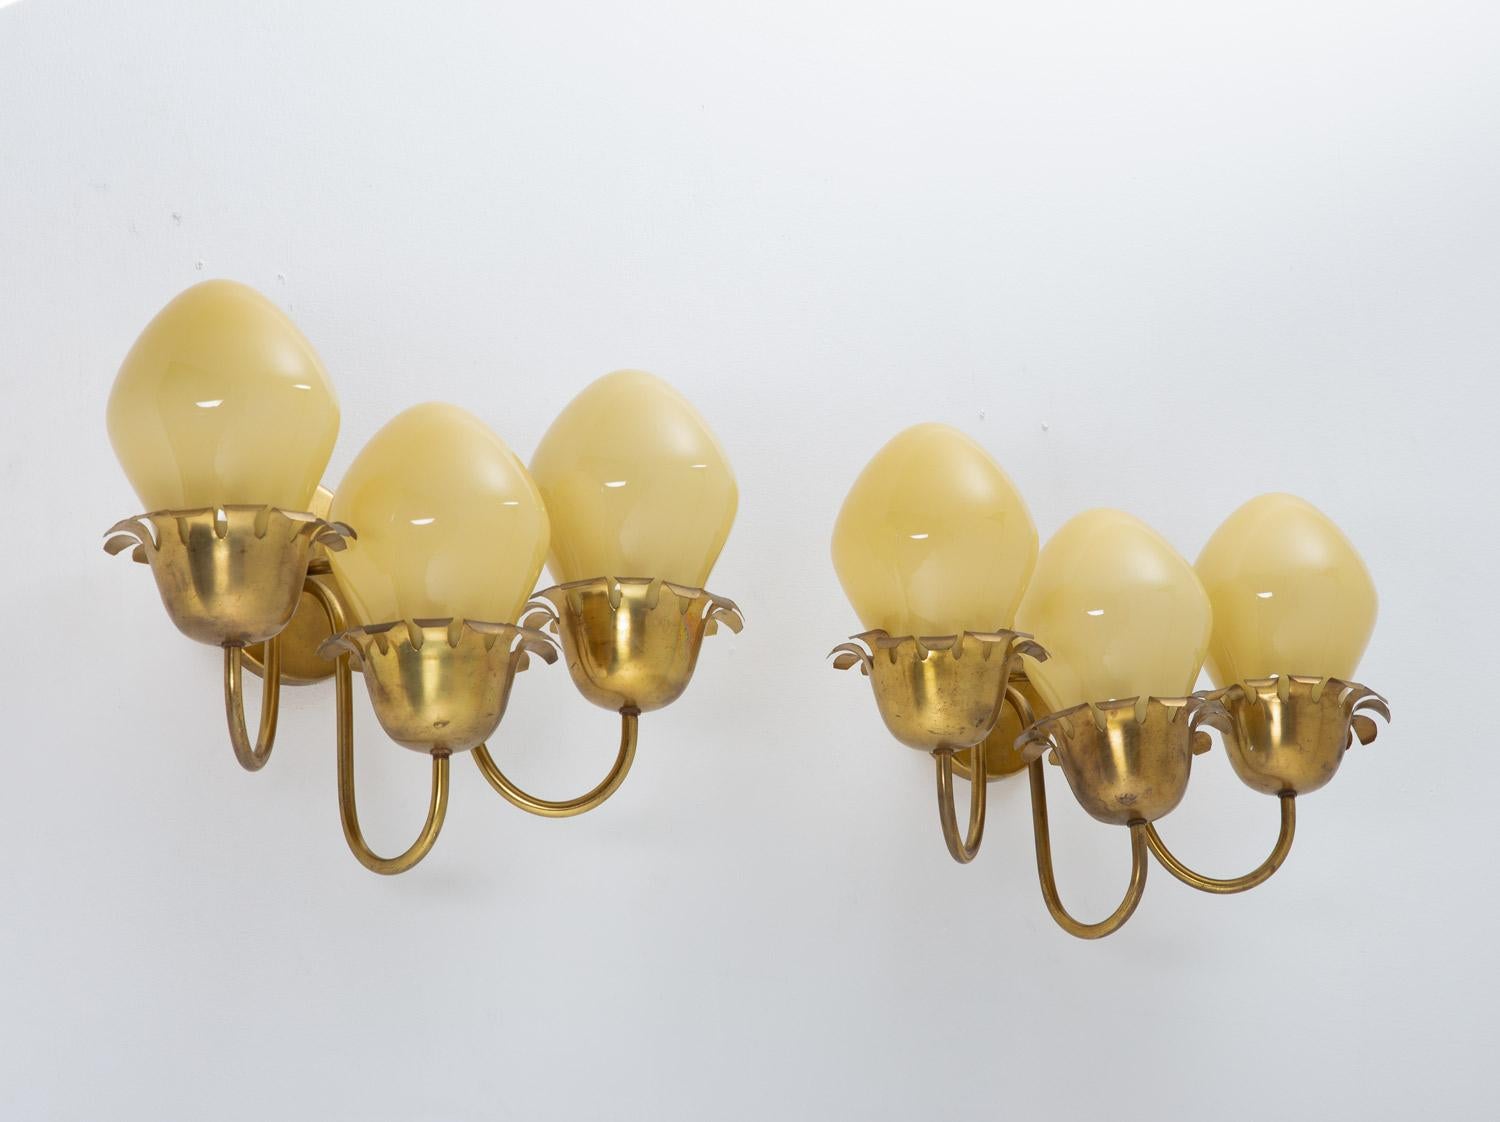 Rare wall sconces by unknown manufacturer, most likely produced in Sweden, circa 1940.
These lamps feature three light sources, hidden by a large yellow-white glass shade. The shade is held by a polished brass frame with beautiful details, typical